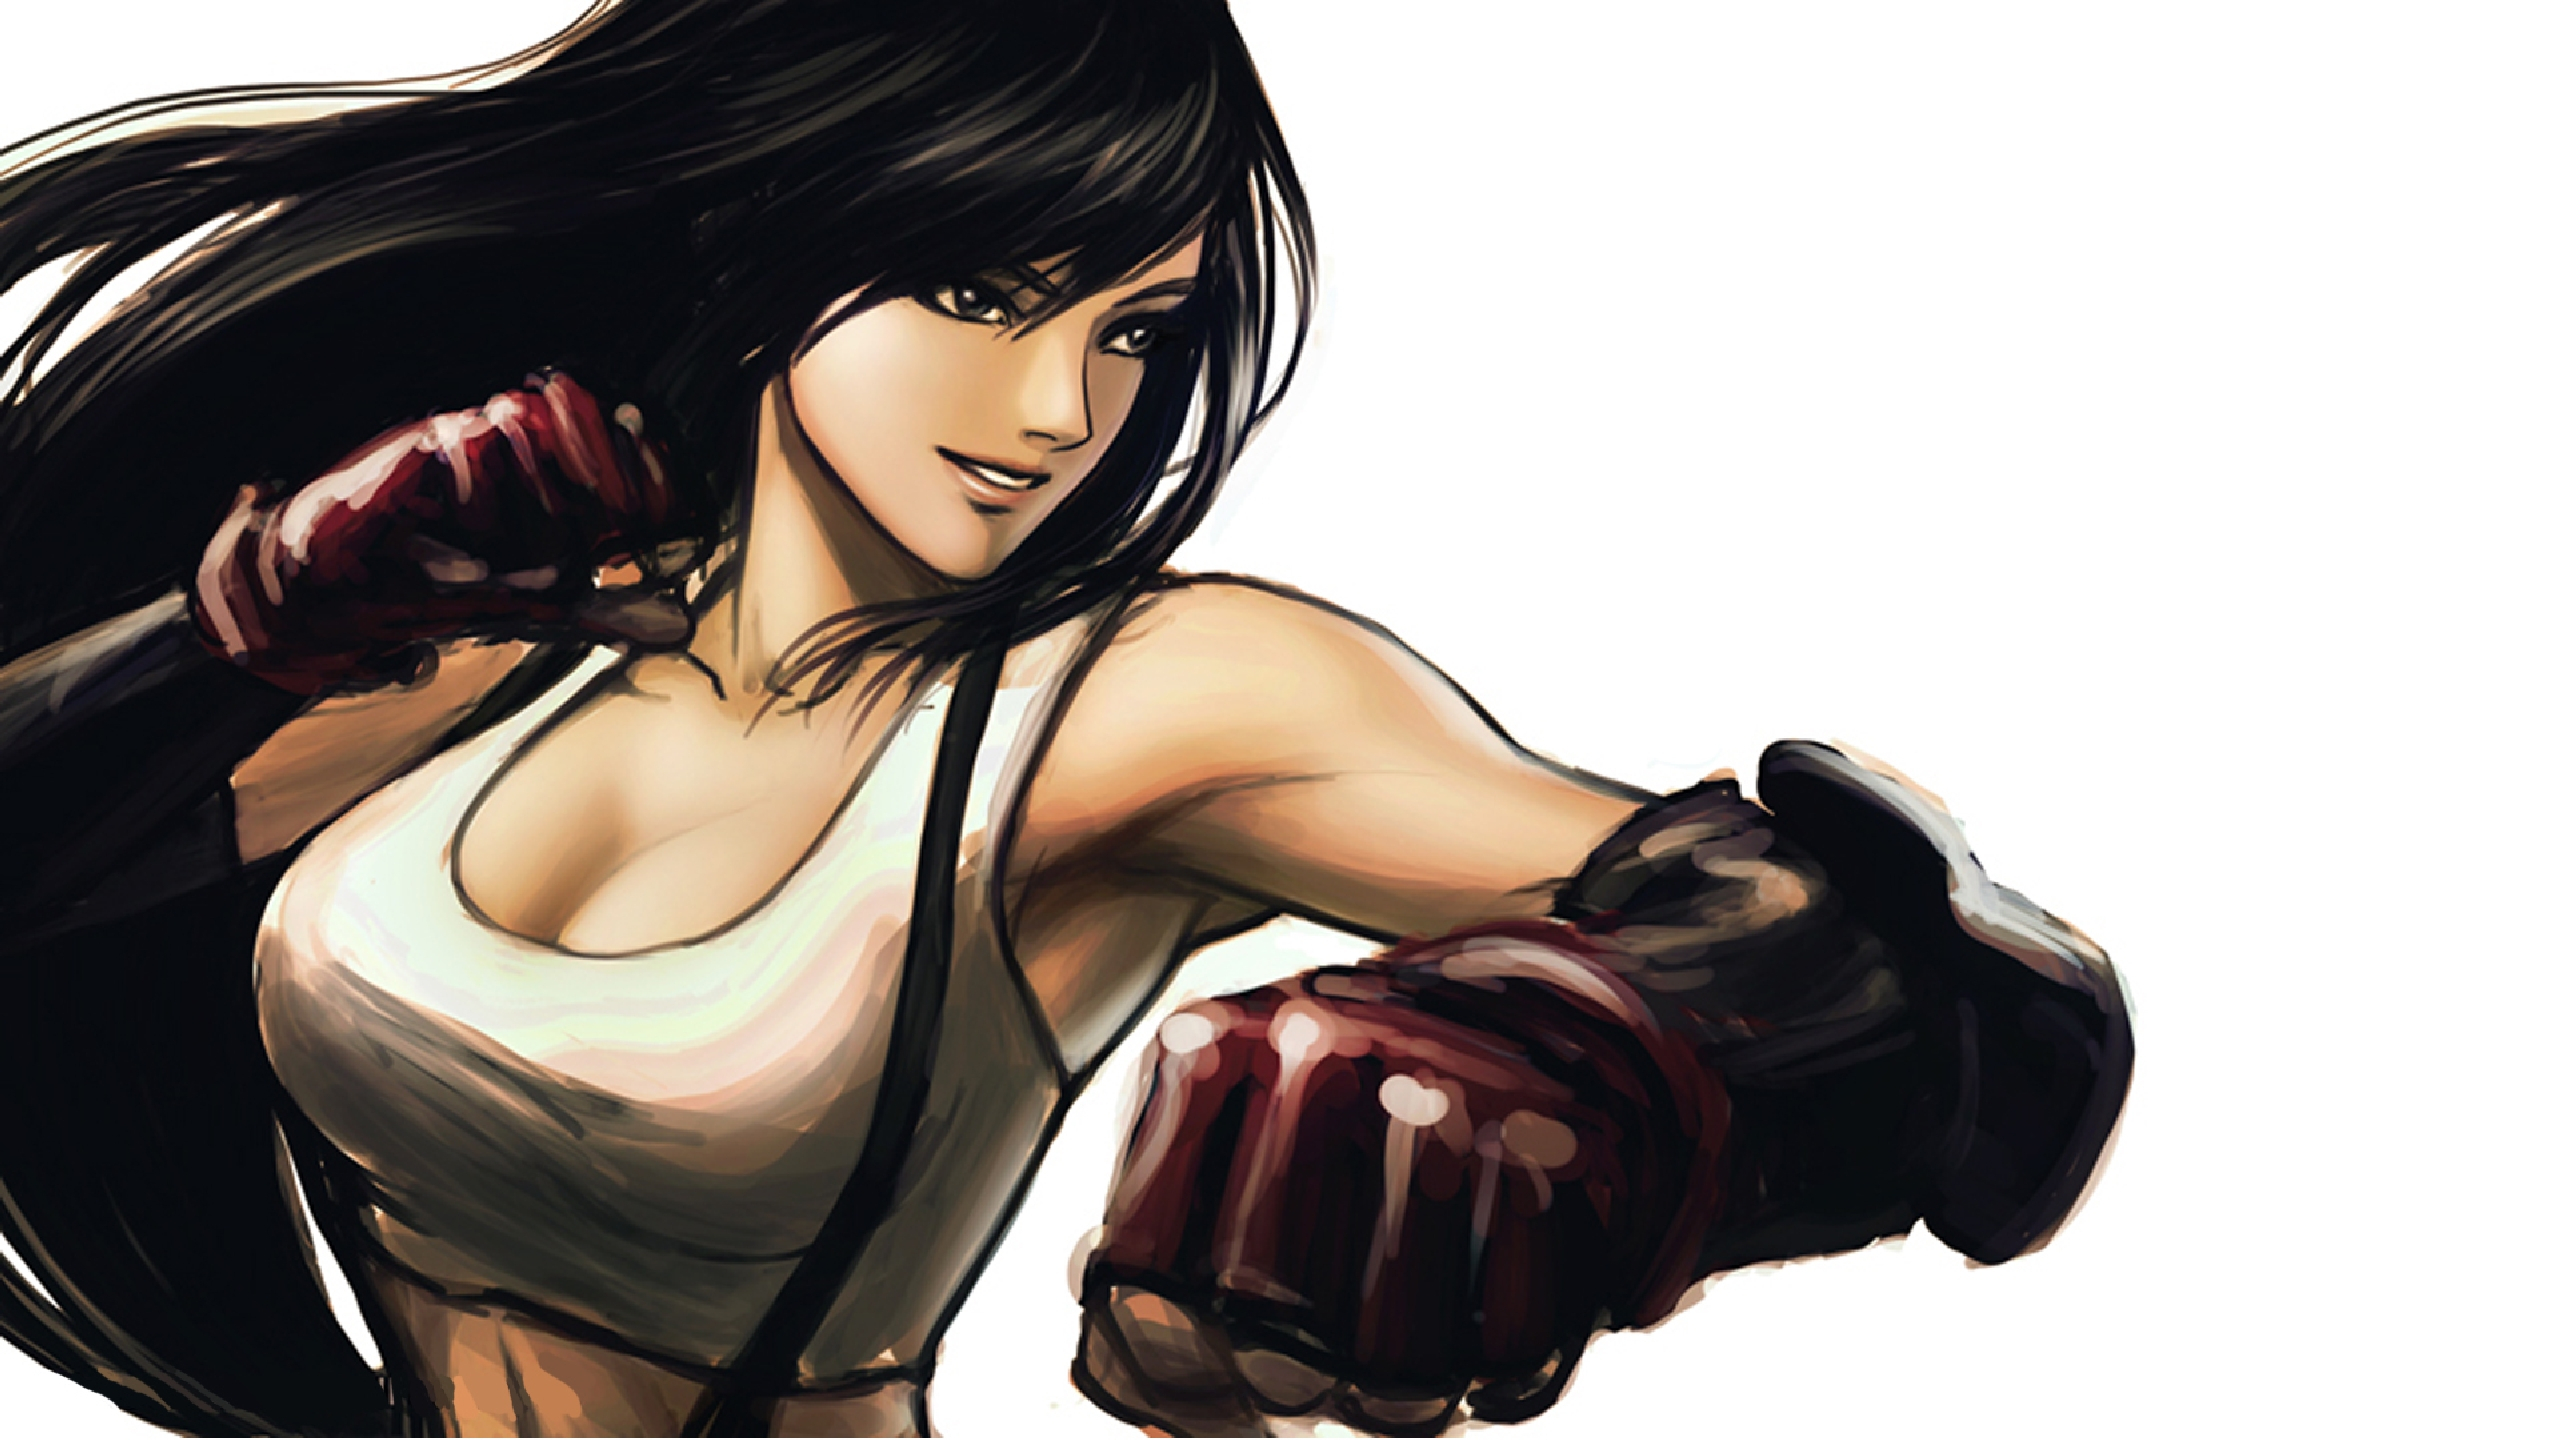 2560x1440 100+ Tifa Lockhart HD Wallpapers and Backgrounds